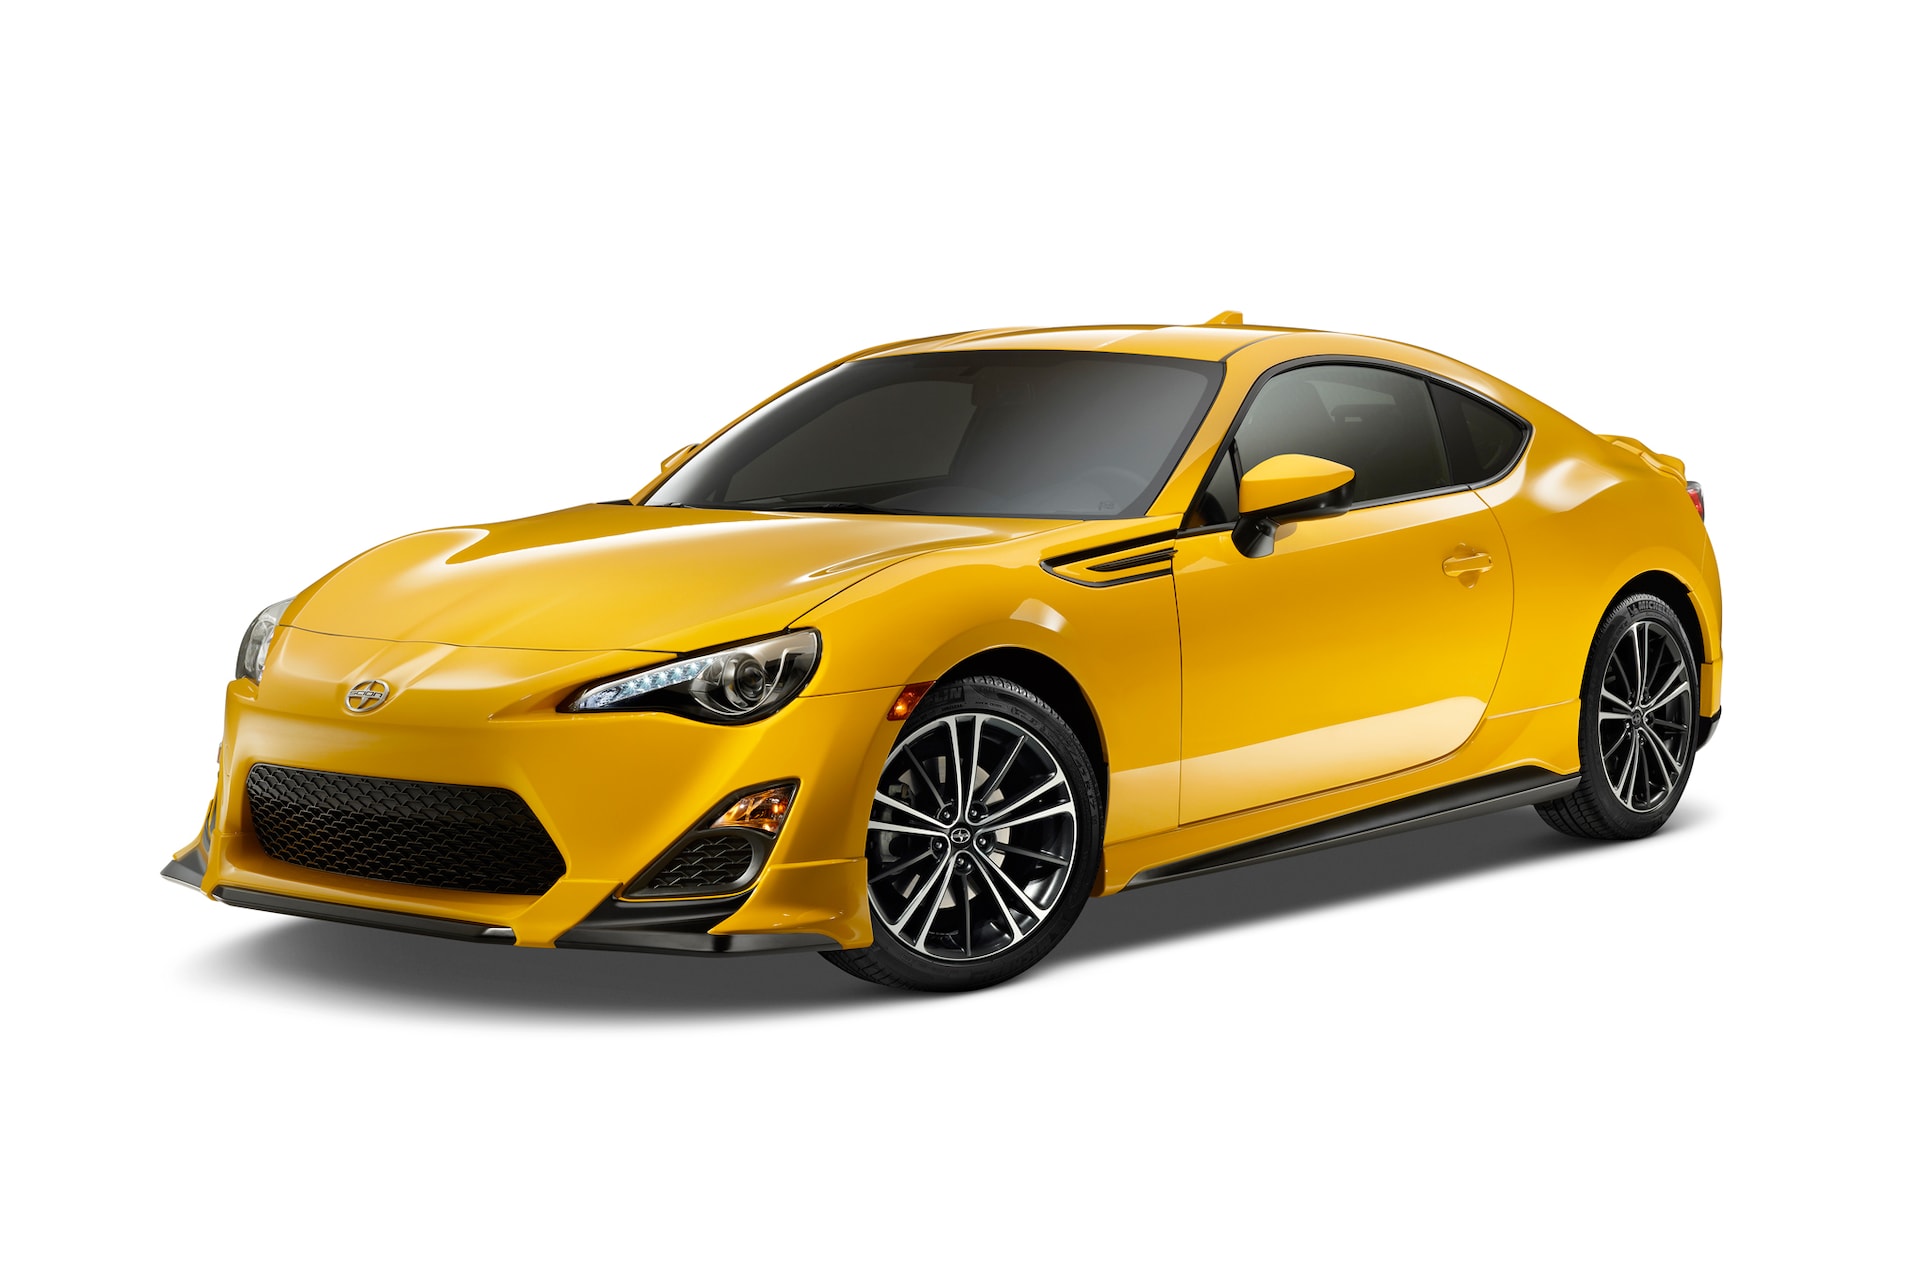 2014 Scion FR-S Gains Release Series 1.0 Package